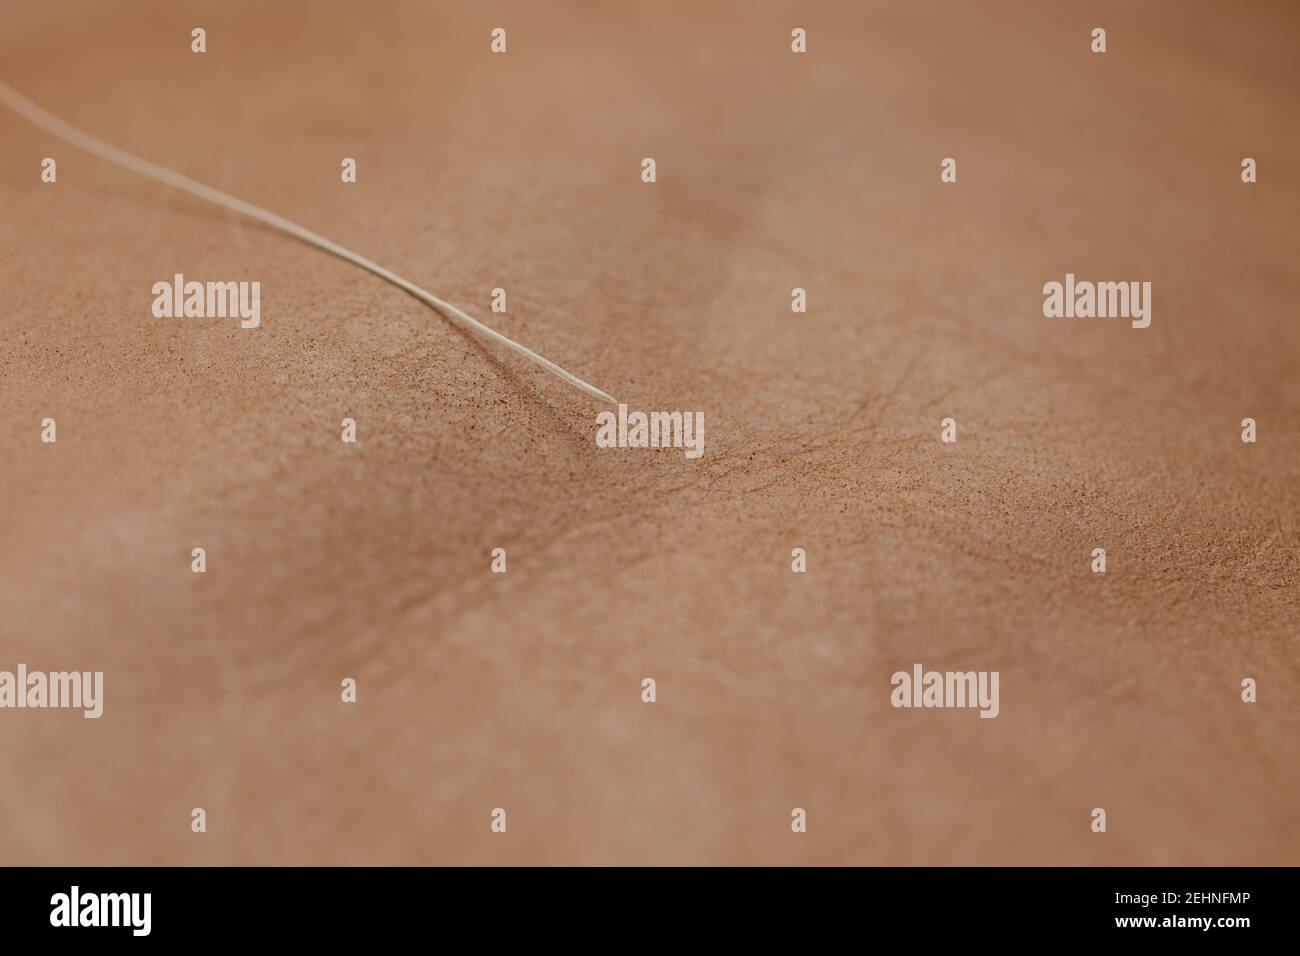 Single cat whisker over a leather background with shallow depth of field. Macro shot. Series. Stock Photo